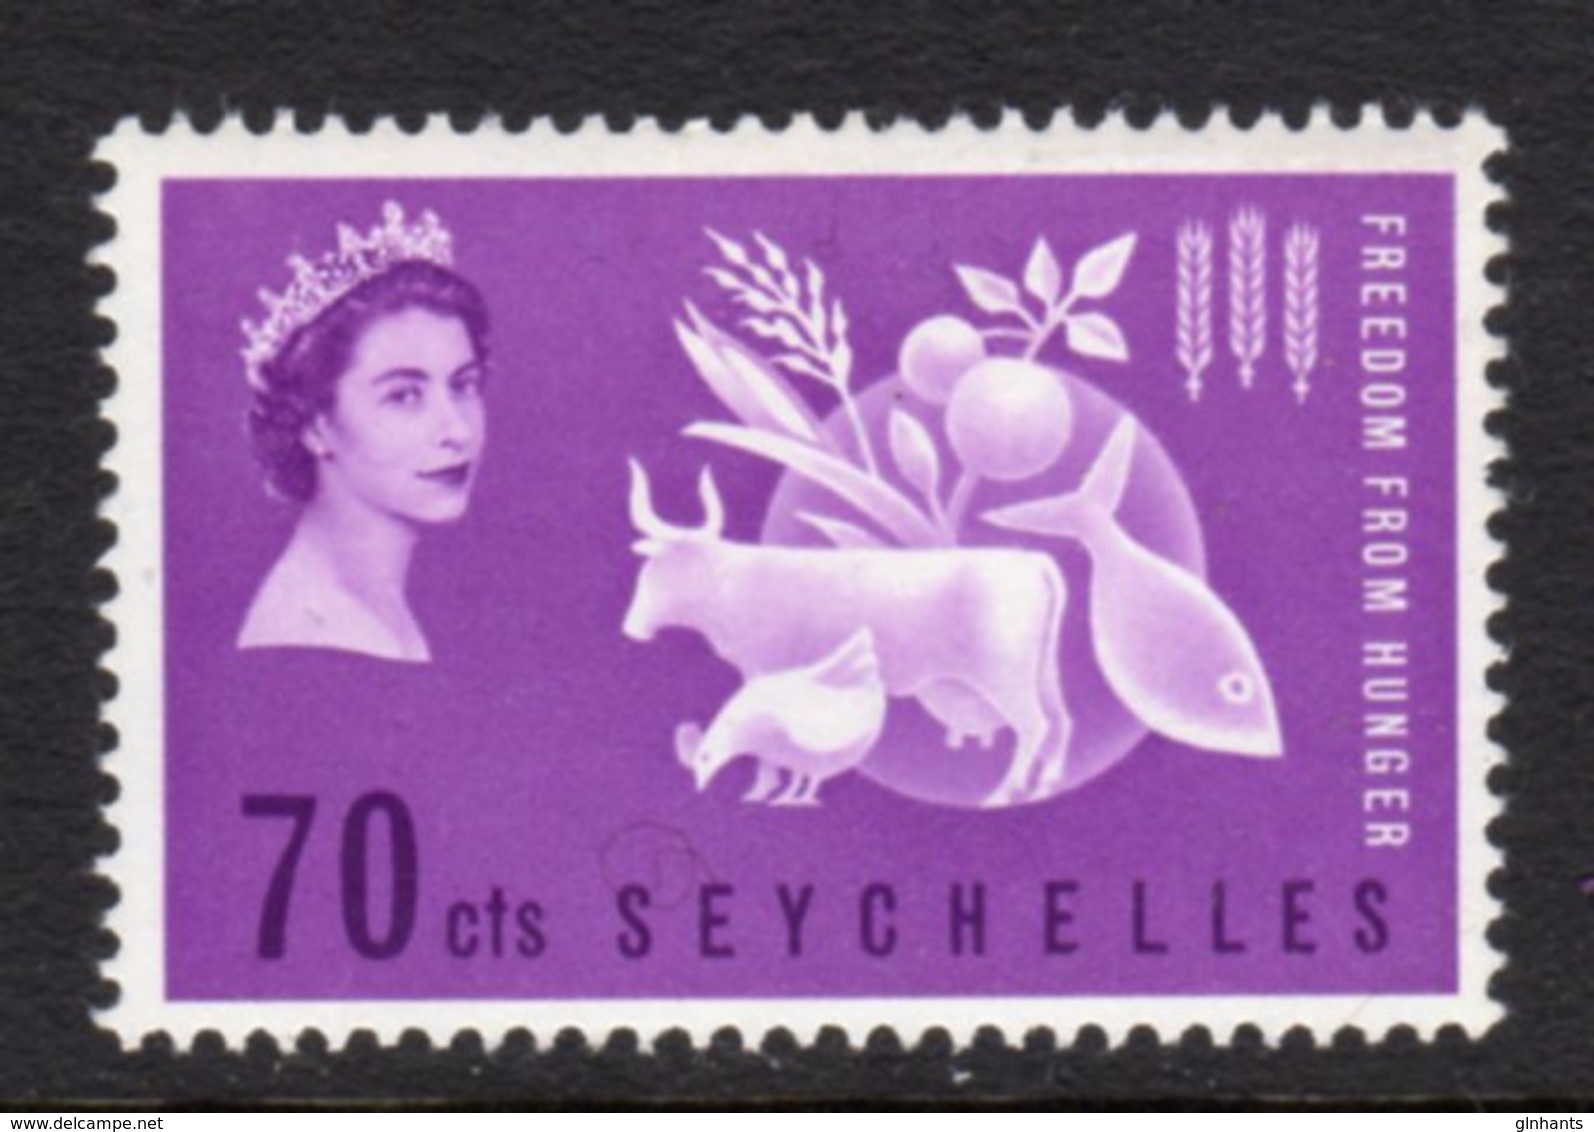 SEYCHELLES - 1963 FREEDOM FROM HUNGER STAMP FINE MNH ** SG 213 - Seychelles (...-1976)